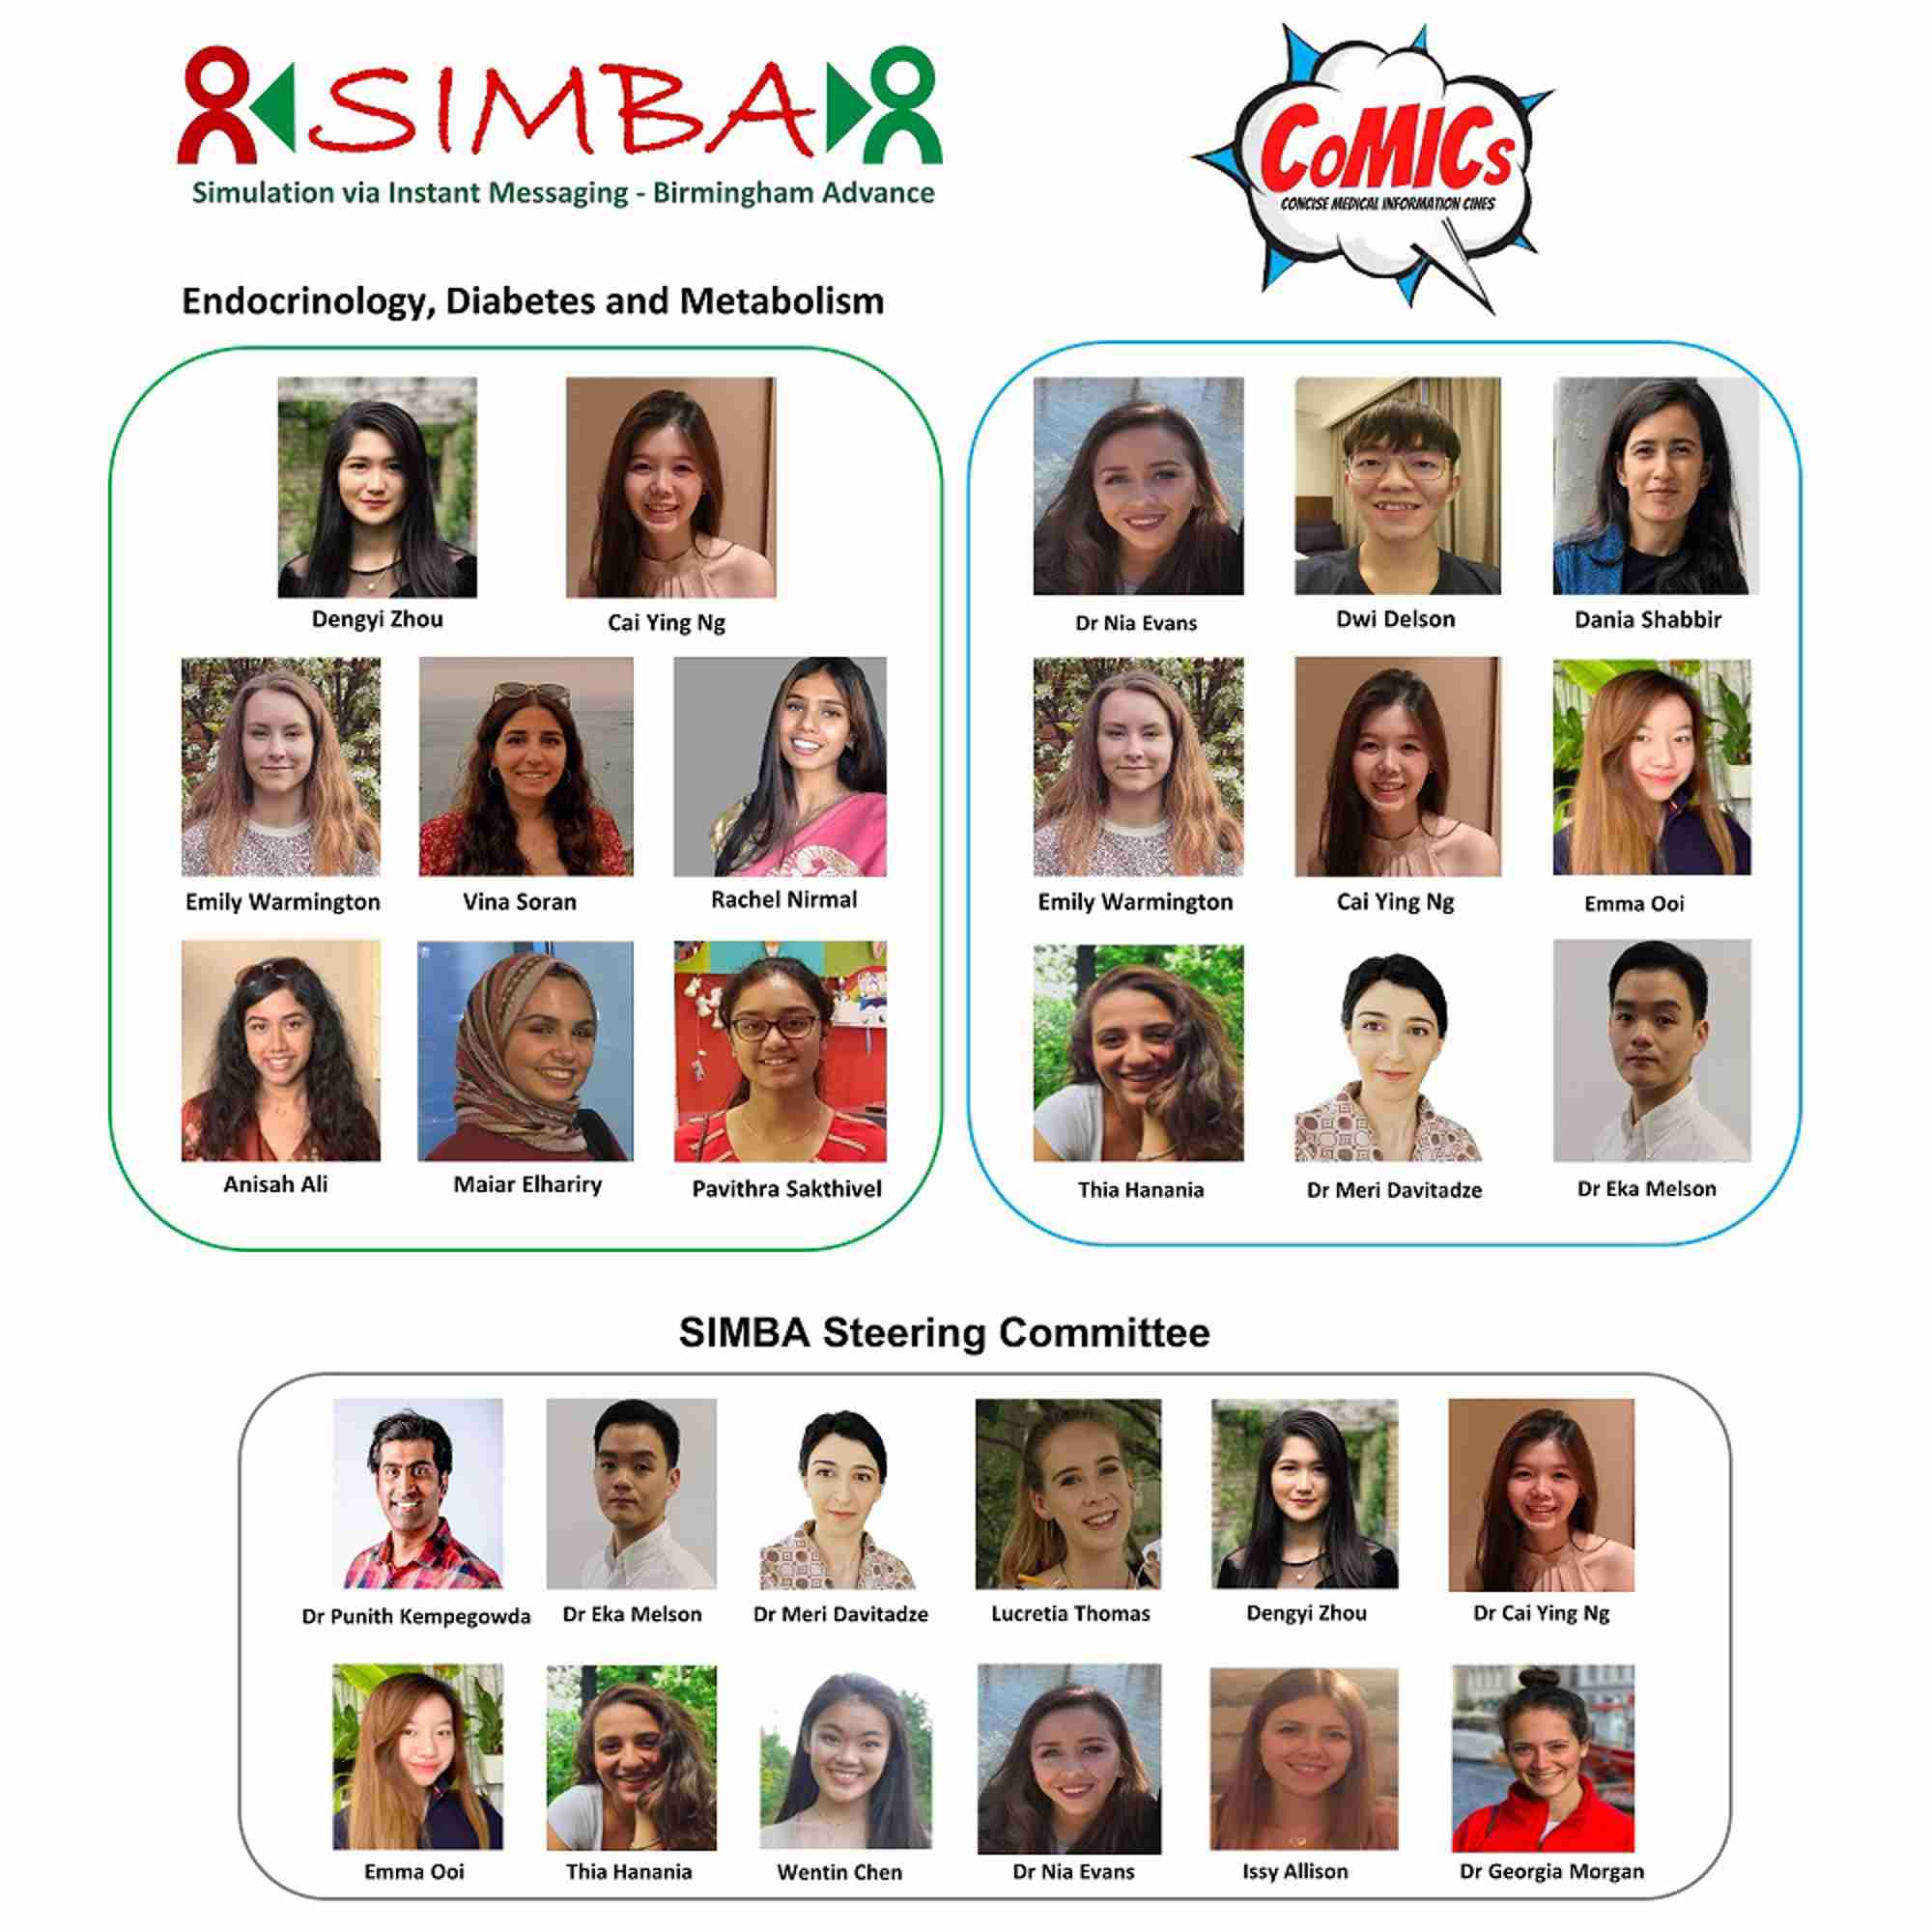 The SIMBA team and steering committee